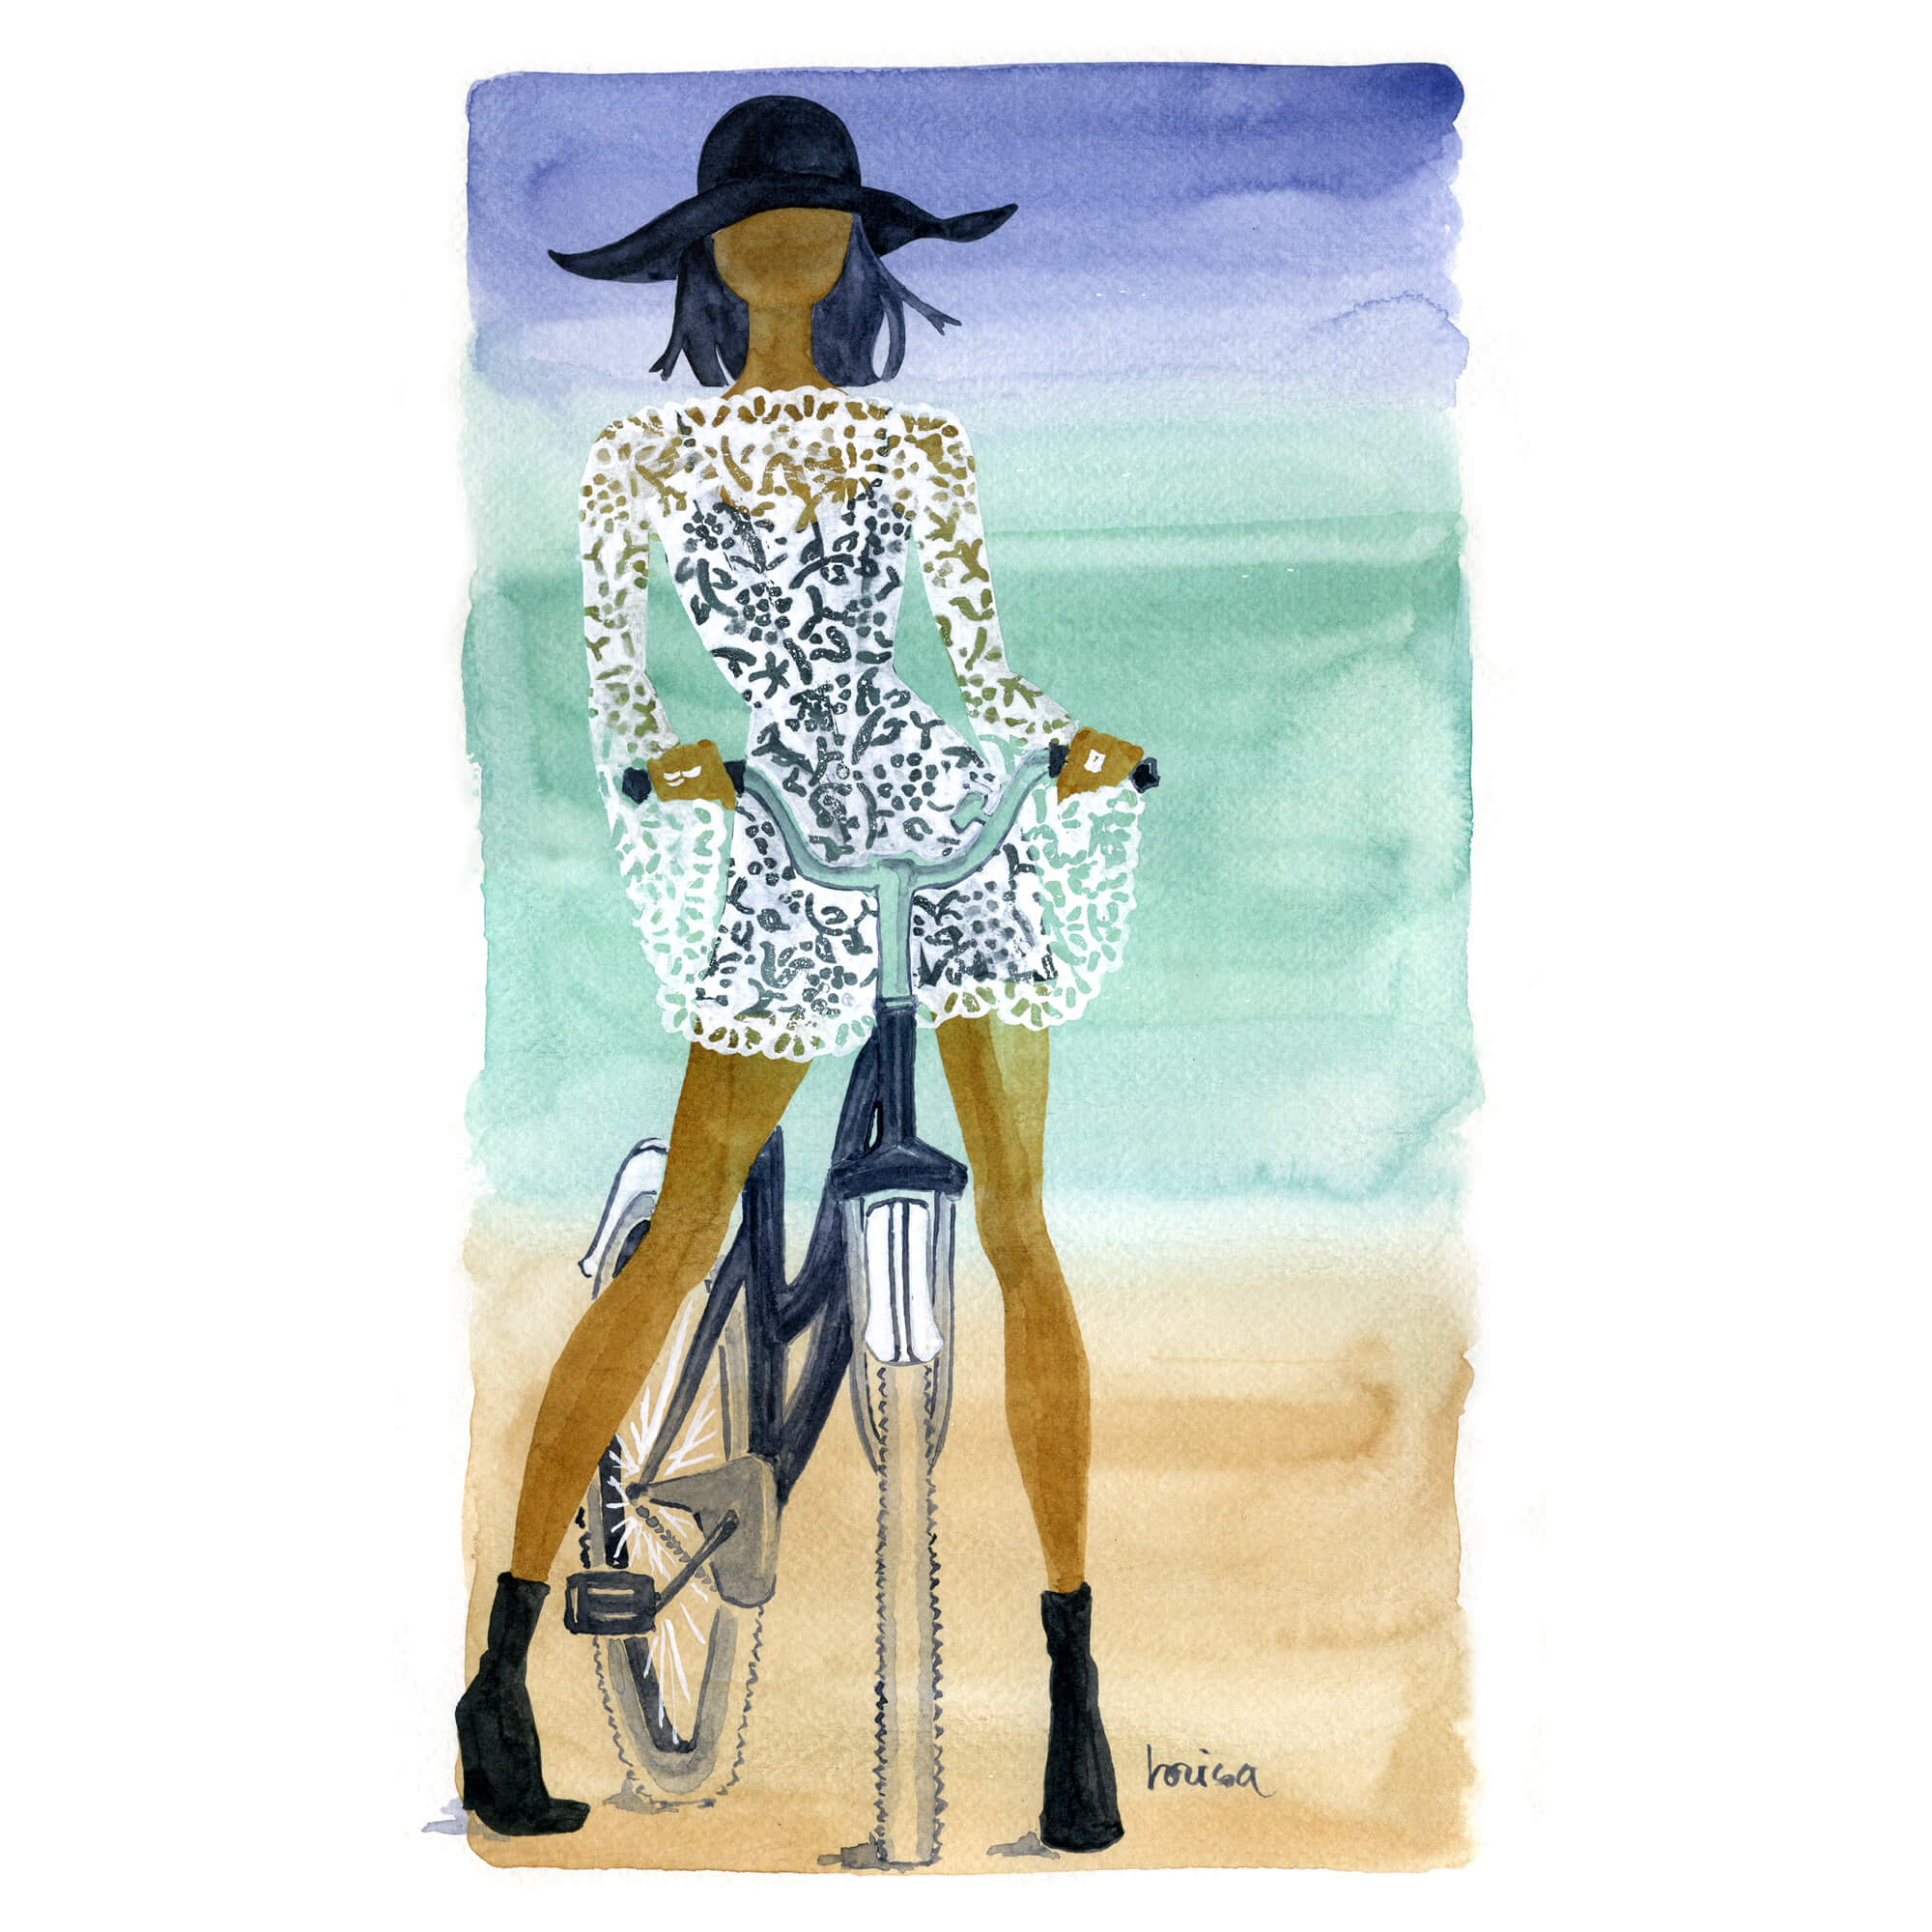 A paper giclée print of a watercolor artwork featuring a fashionable woman on a bike by Hawaii artist Lovisa Oliv 